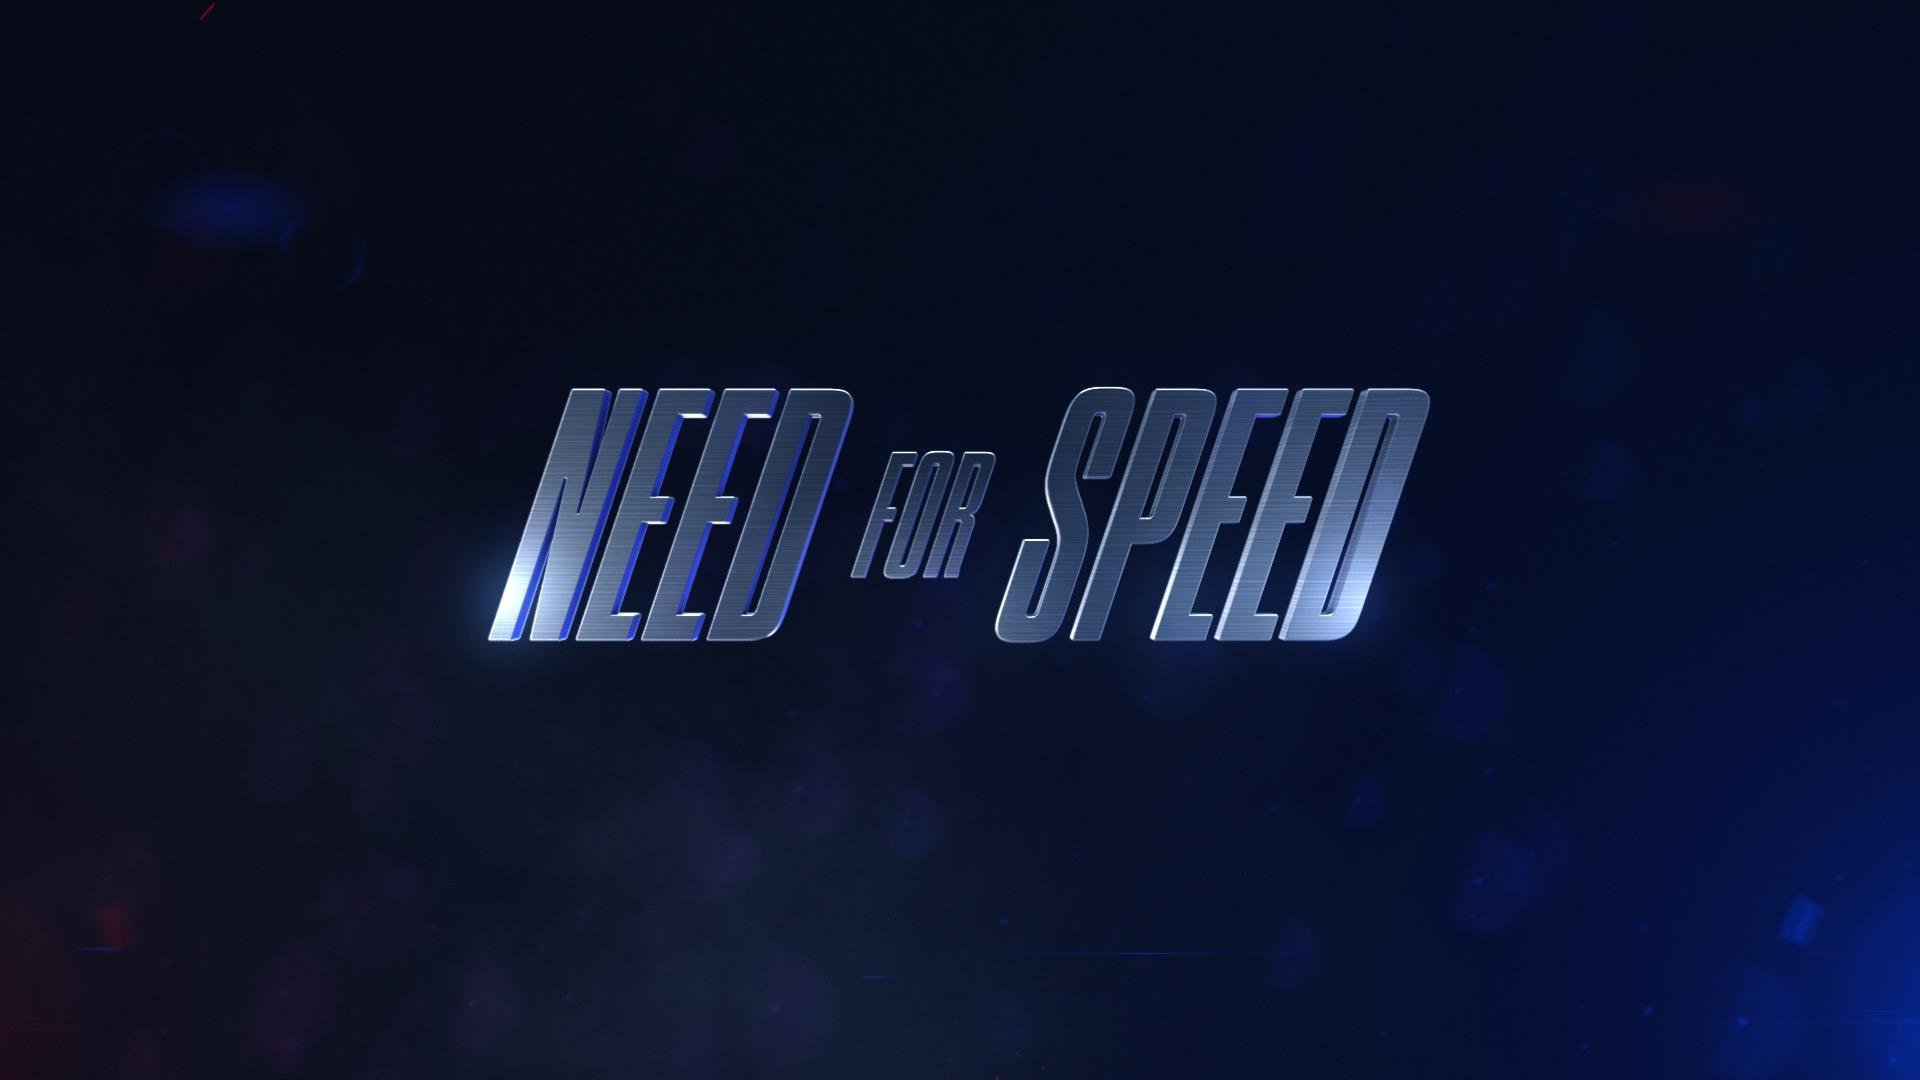 Awesome Need For Speed (NFS) free wallpaper ID:328358 for hd 1920x1080 desktop